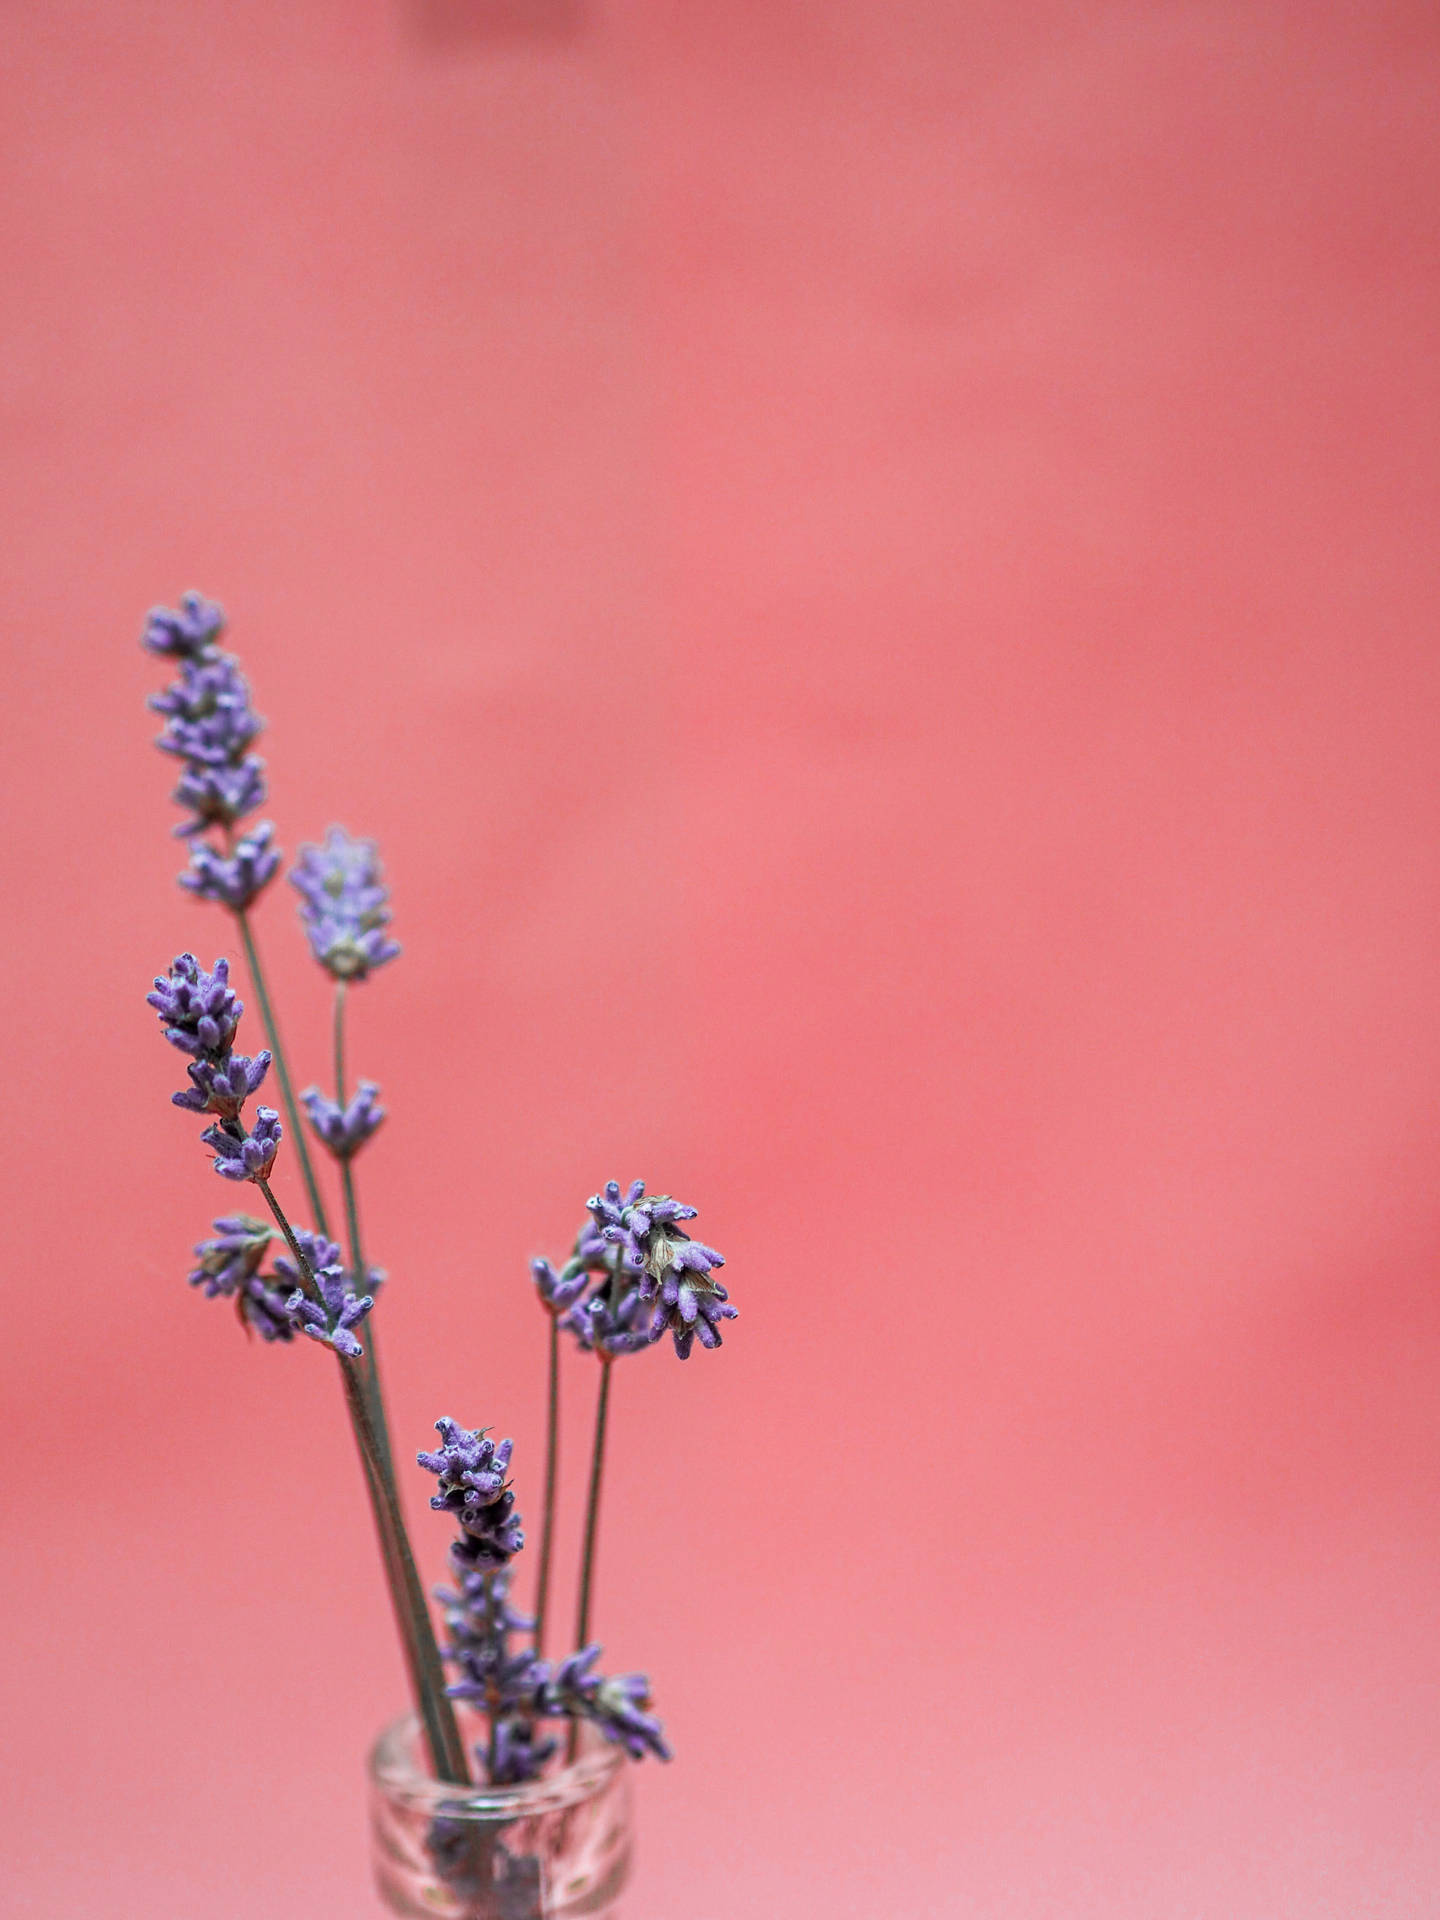 Lavender 3456X4608 Wallpaper and Background Image